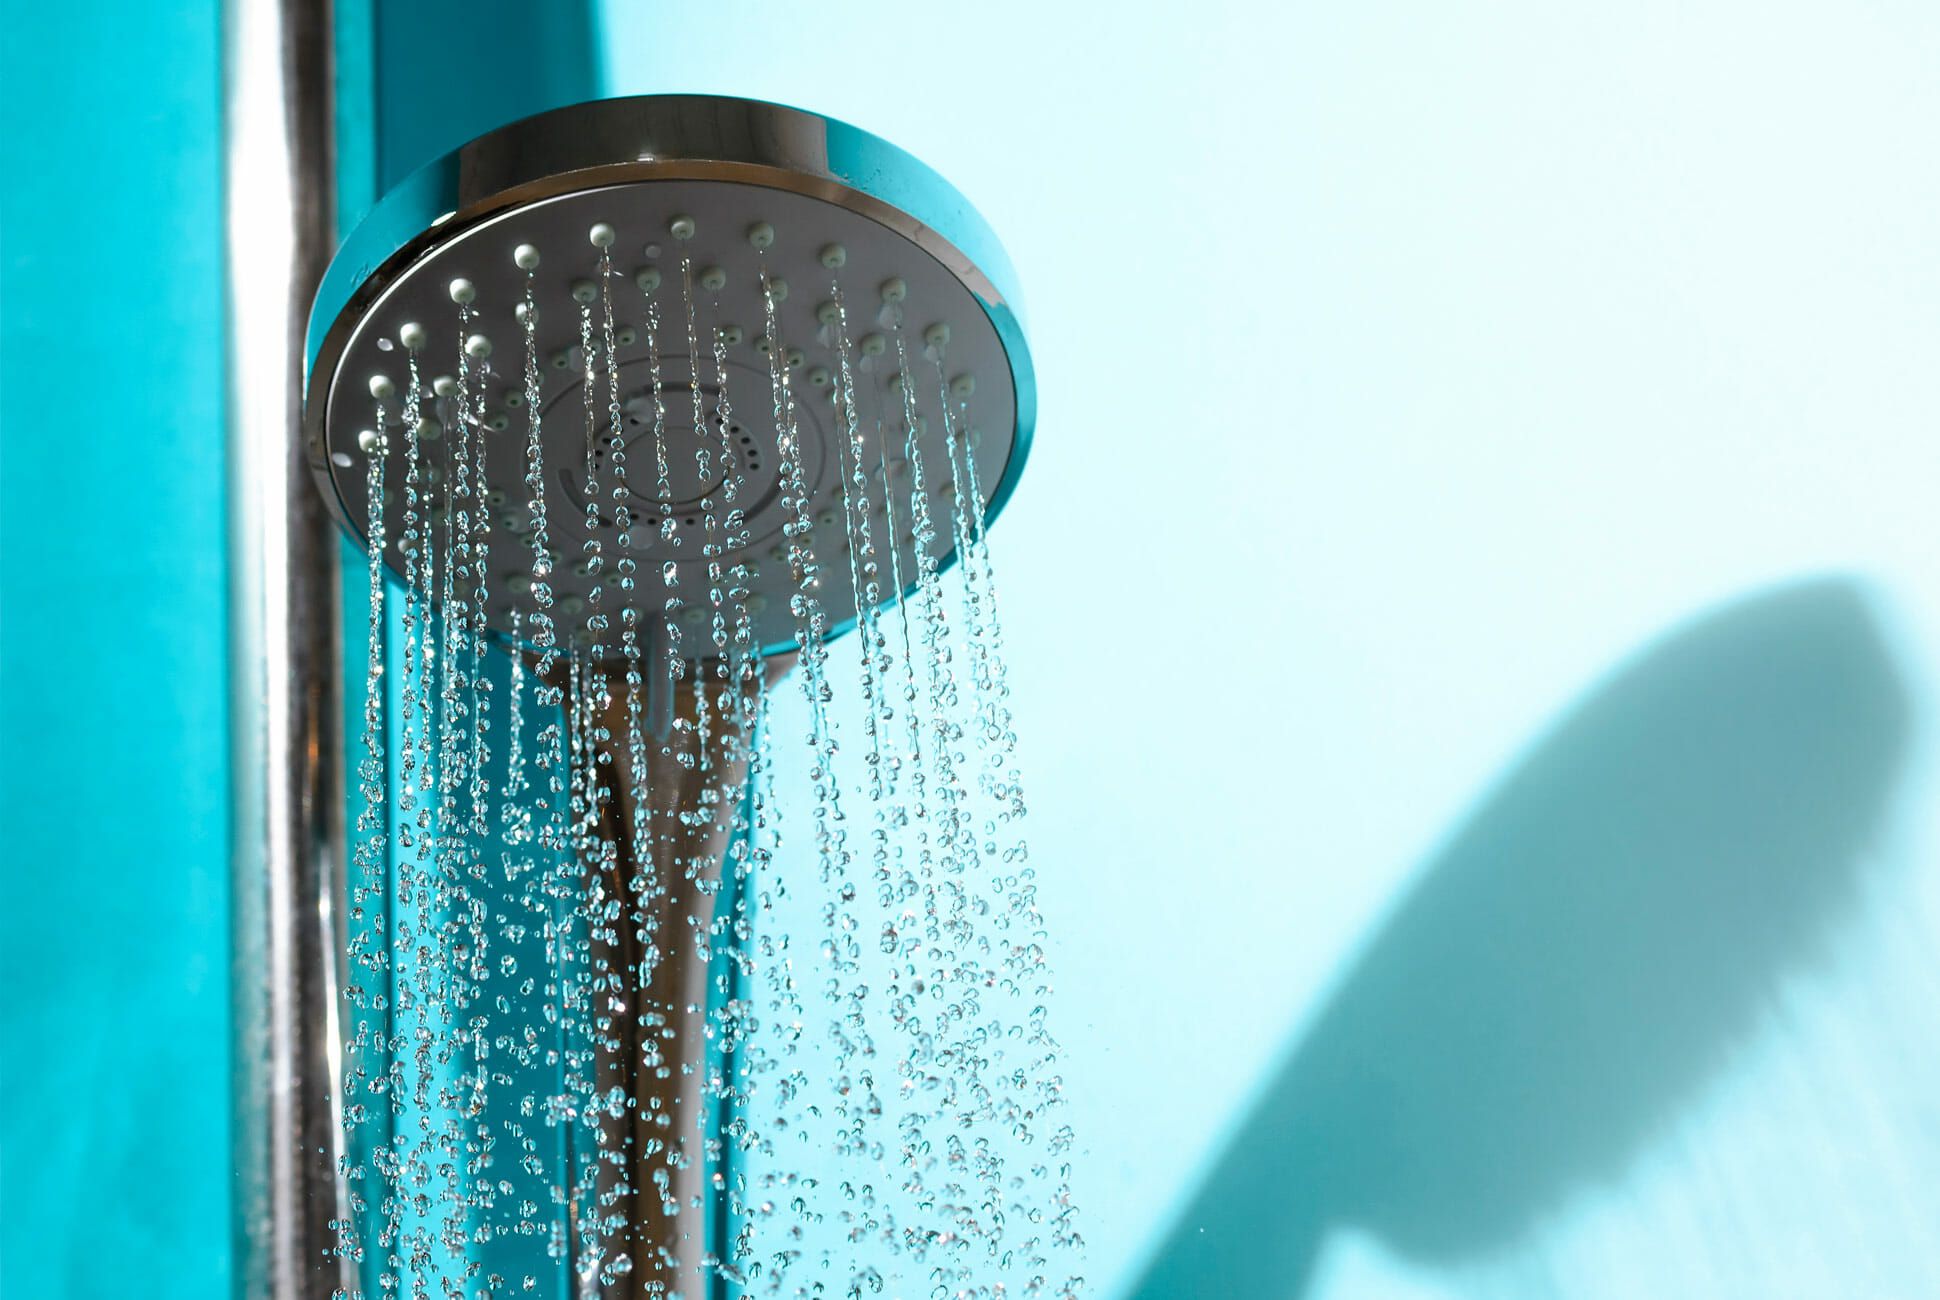 According to Experts, You're Showering All Wrong